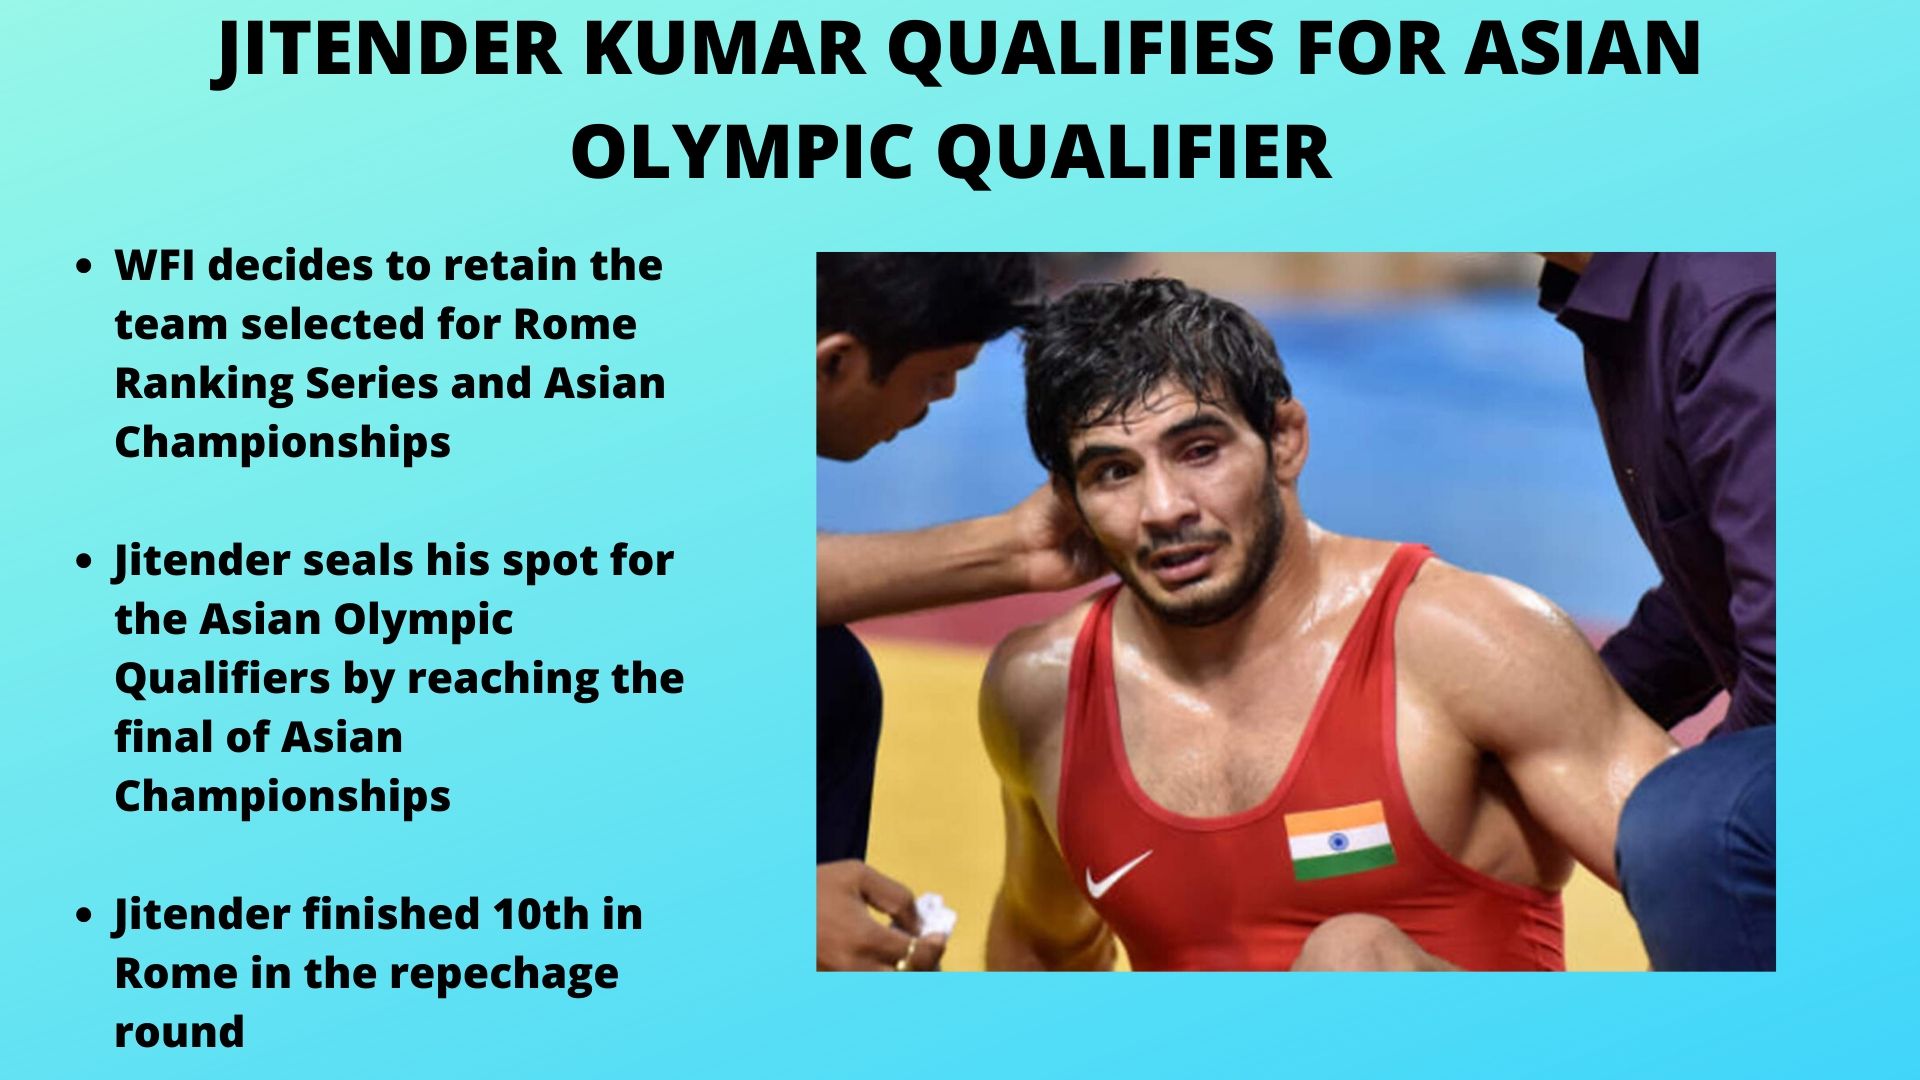 Jitender Kumar qualifies for Asian Olympic Qualifiers.